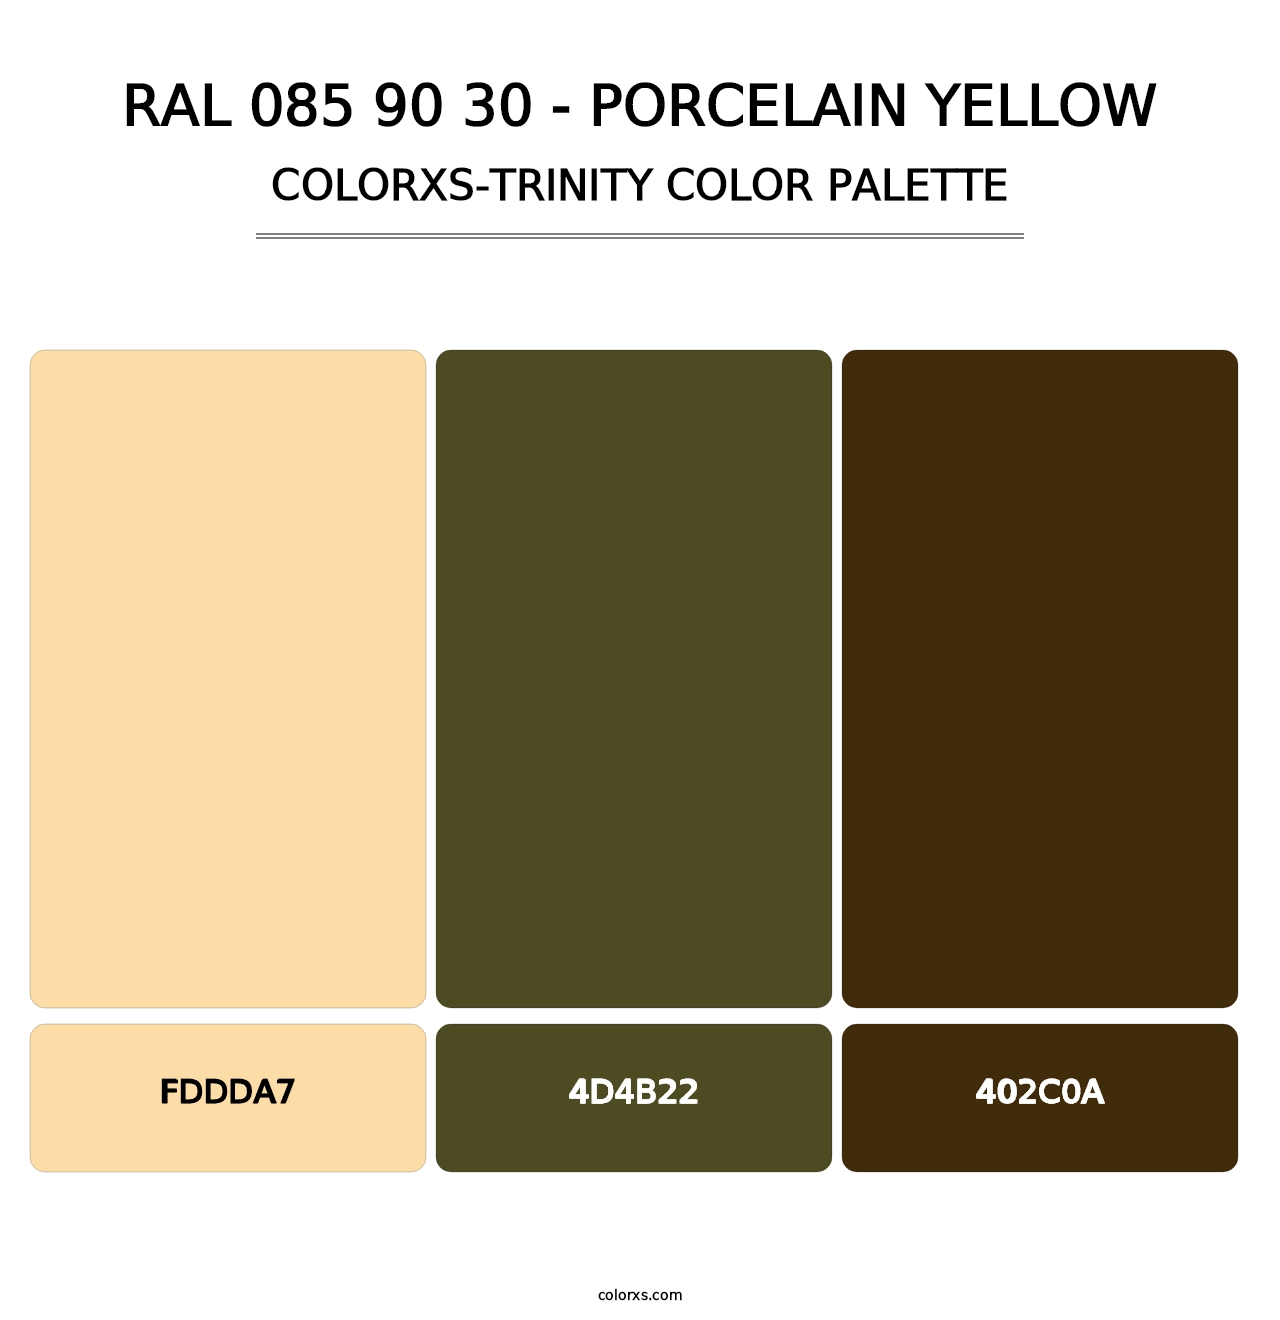 RAL 085 90 30 - Porcelain Yellow - Colorxs Trinity Palette